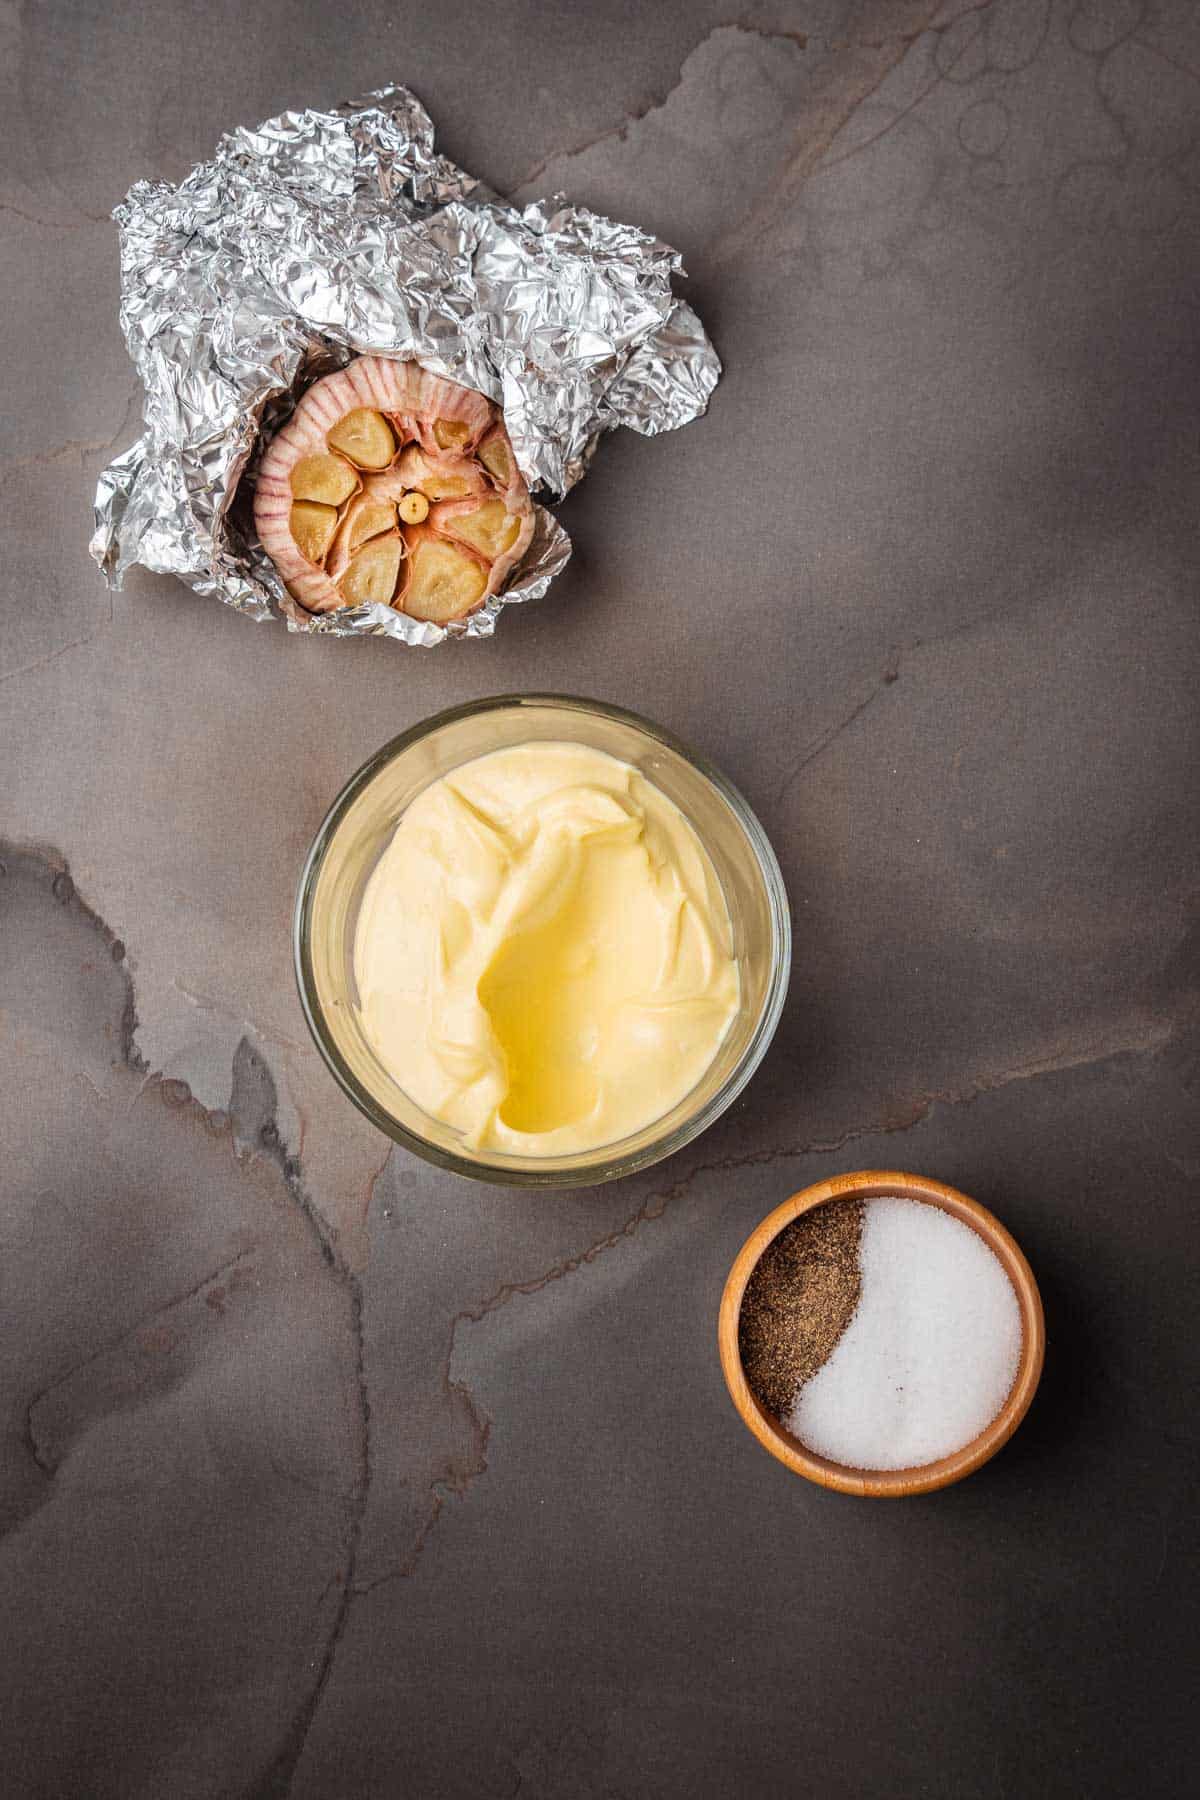 A bowl of aioli, roasted garlic, and a bowl of salt and pepper on a gray background.